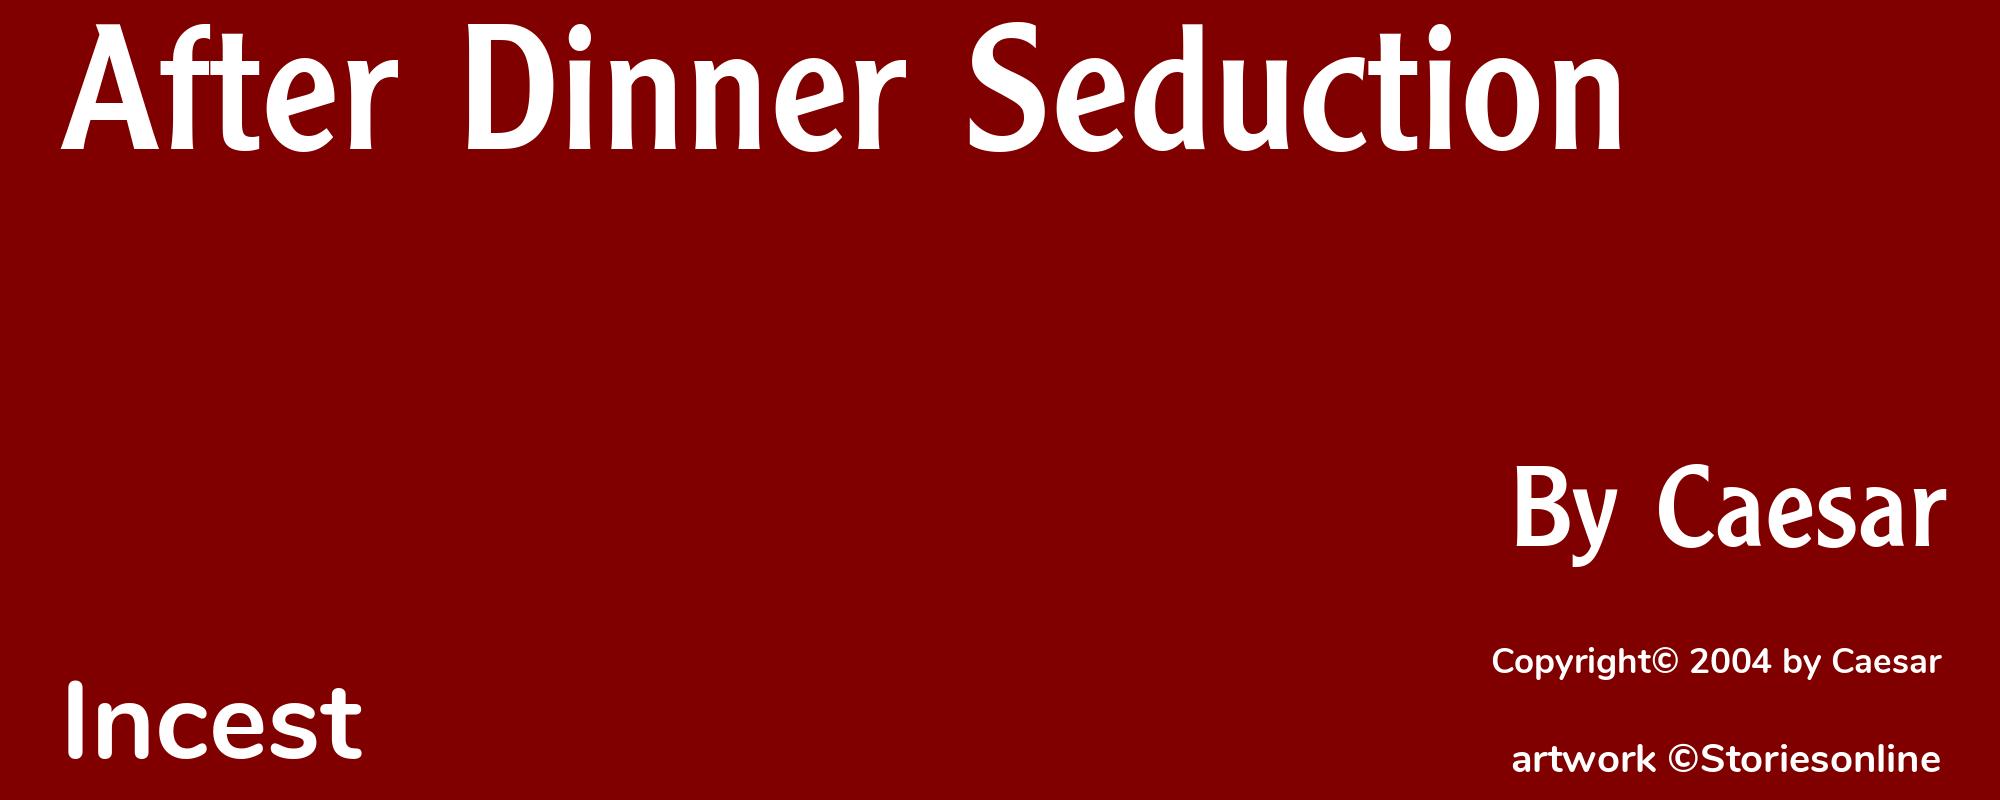 After Dinner Seduction - Cover